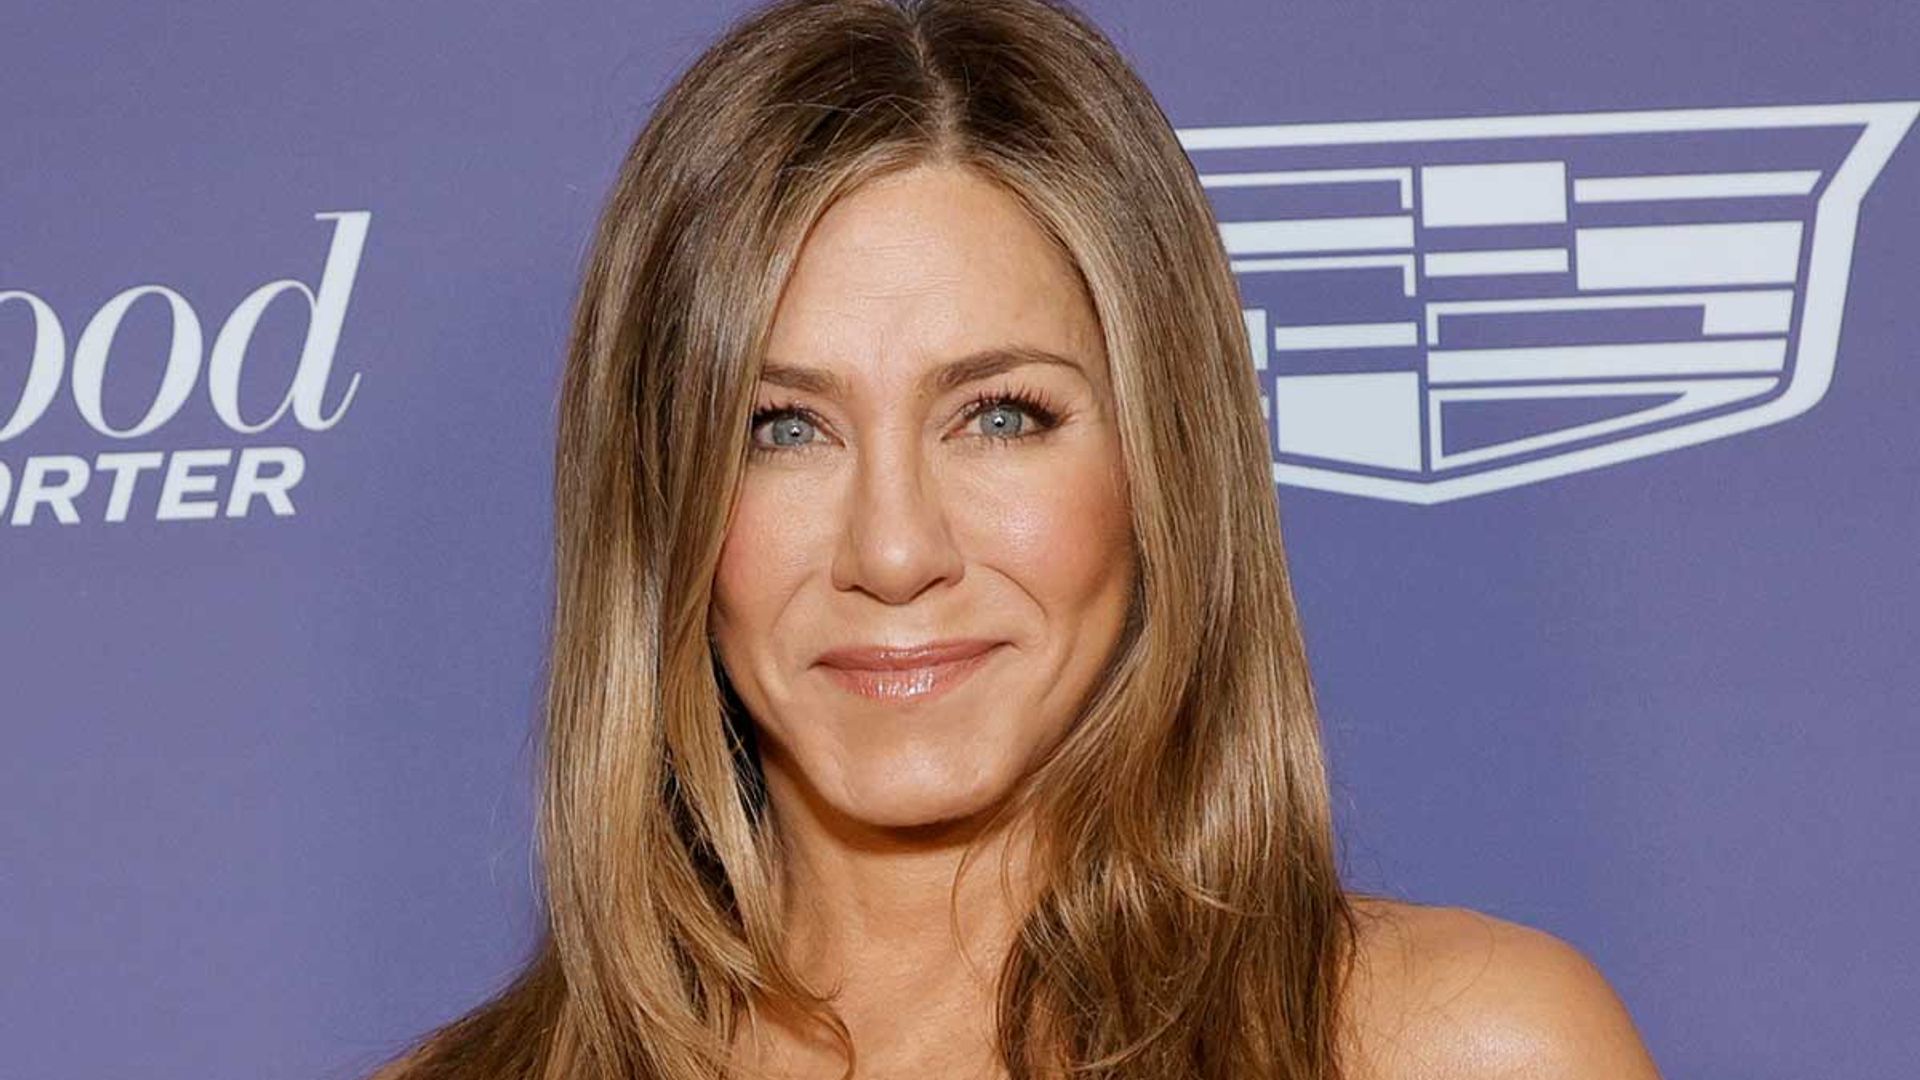 Jennifer Aniston is unrecognisable in photos revealing incredible transformation